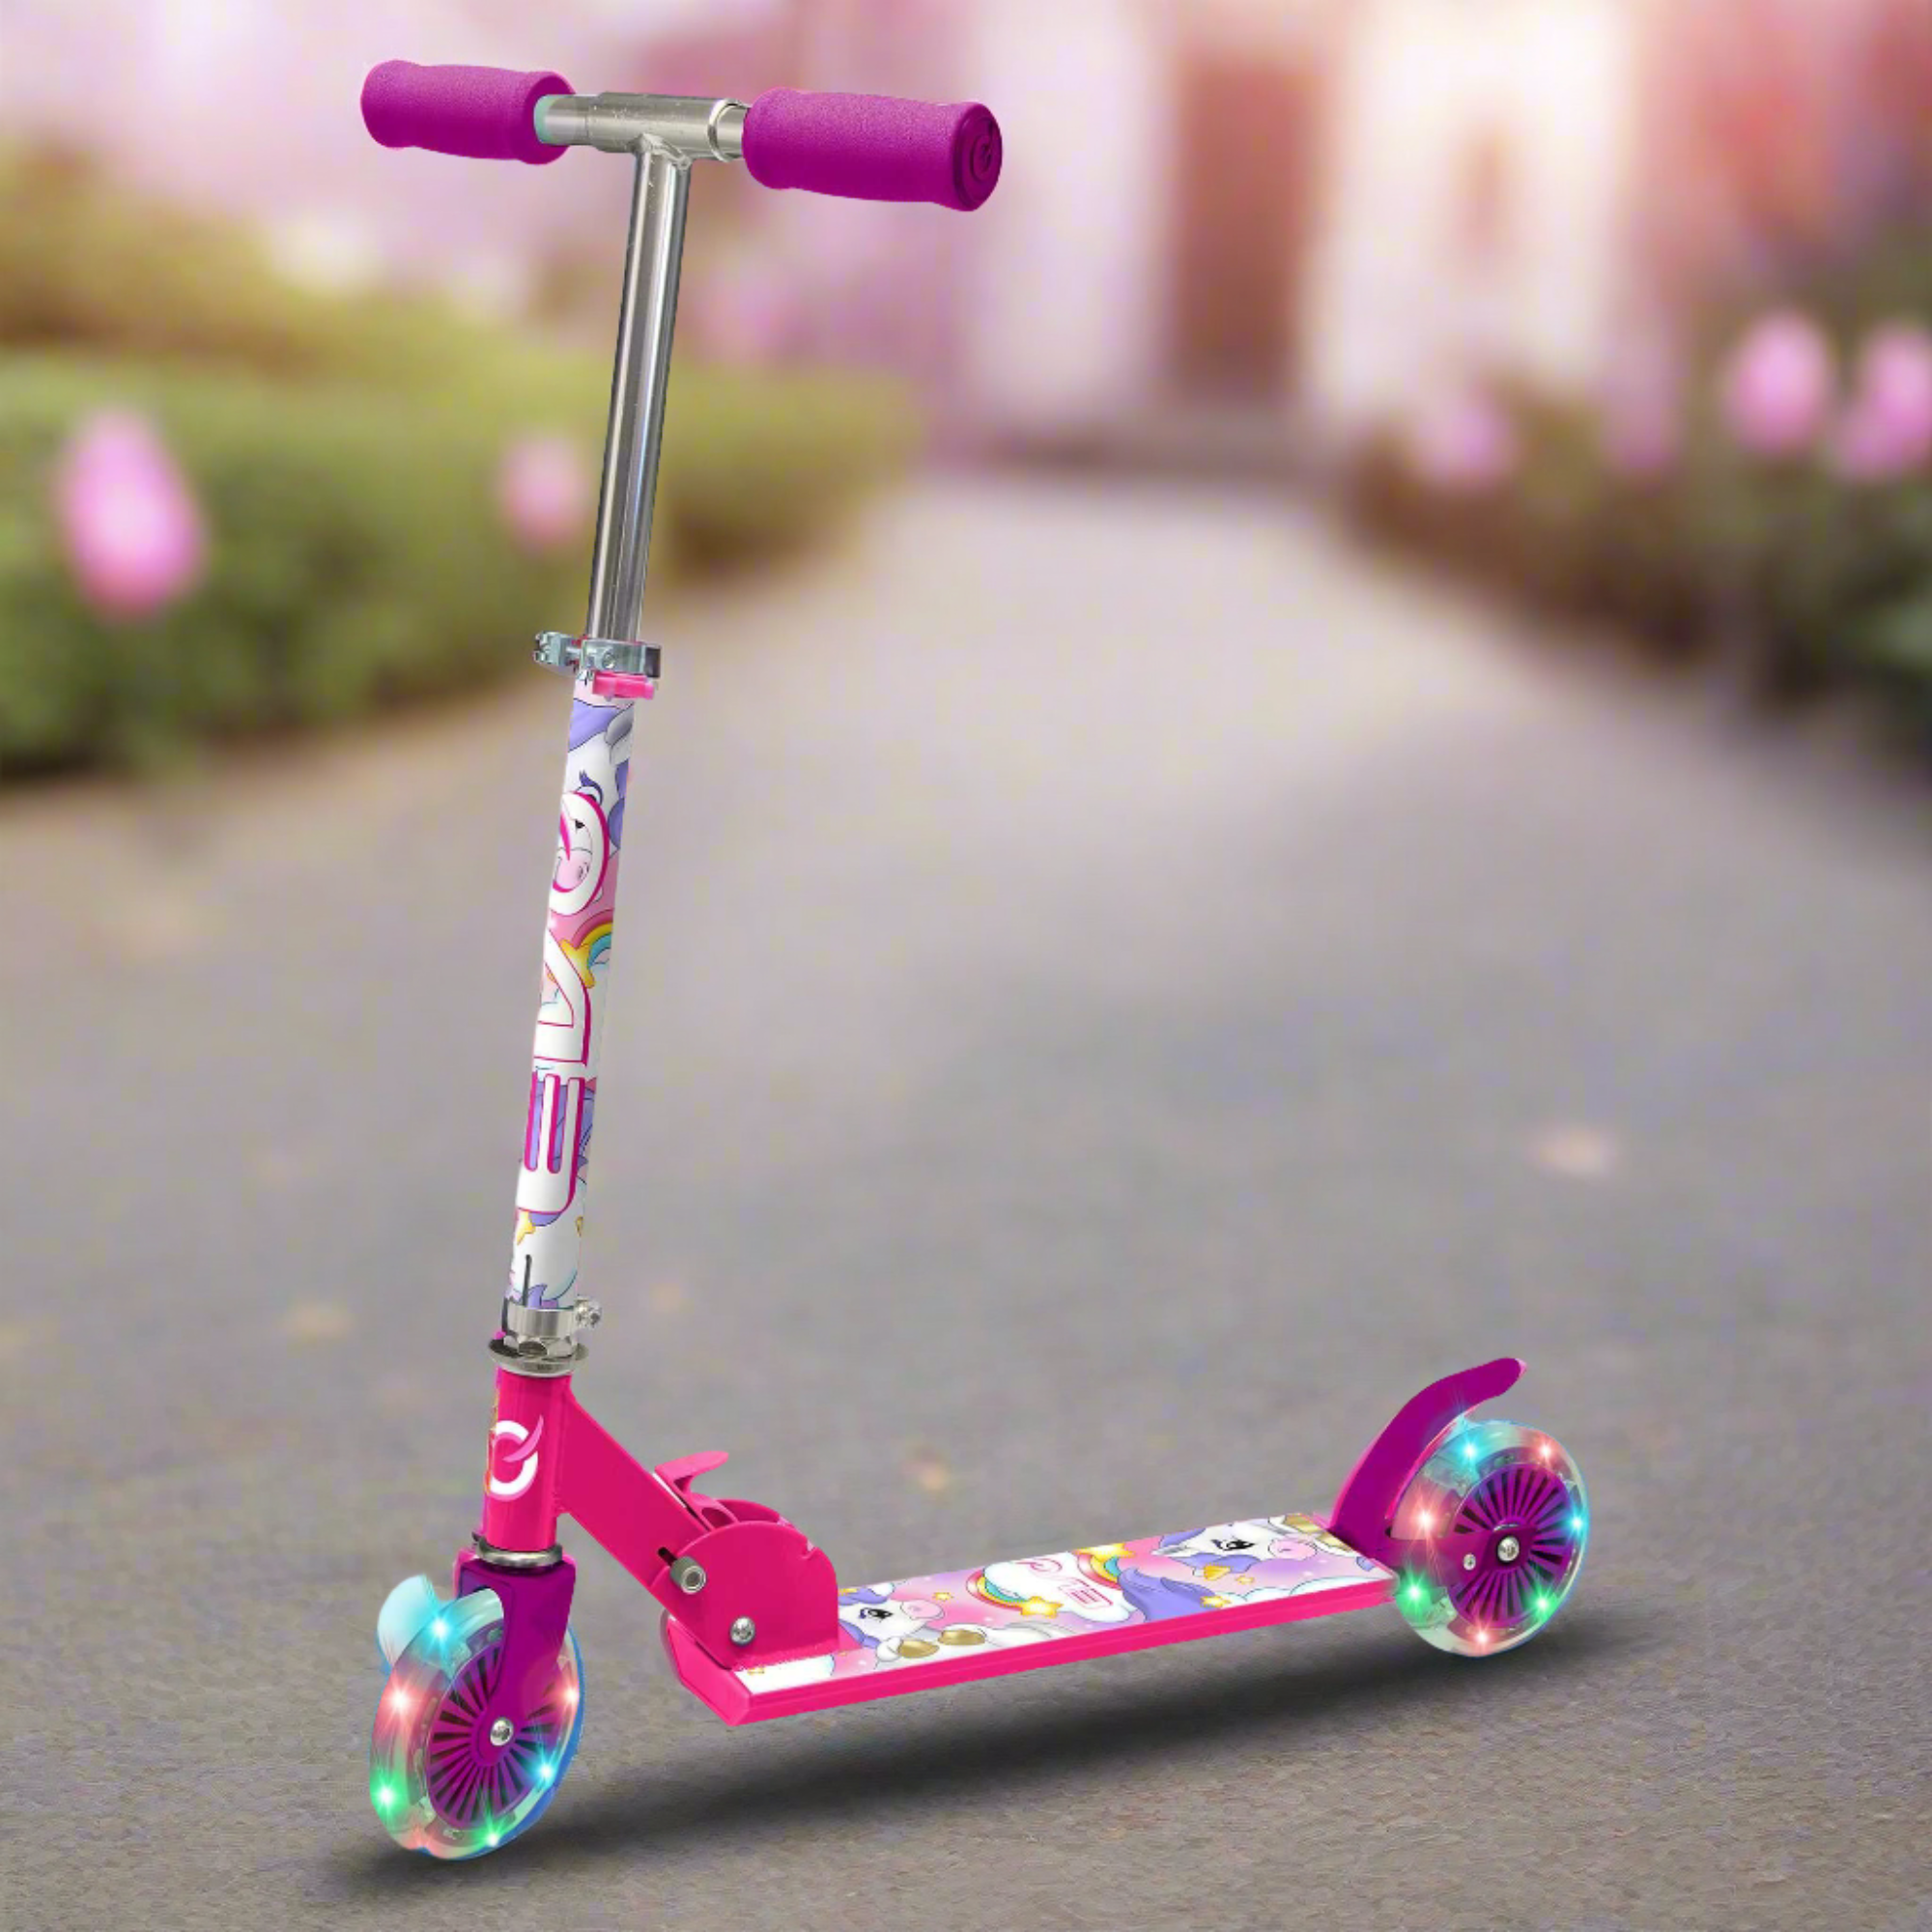 EVO Children's Light Up Inline Scooter for Kids Ages 5 and Up with LED Wheels and Adjustable Handlebar, perfect for enhancing motor skills and outdoor fun.